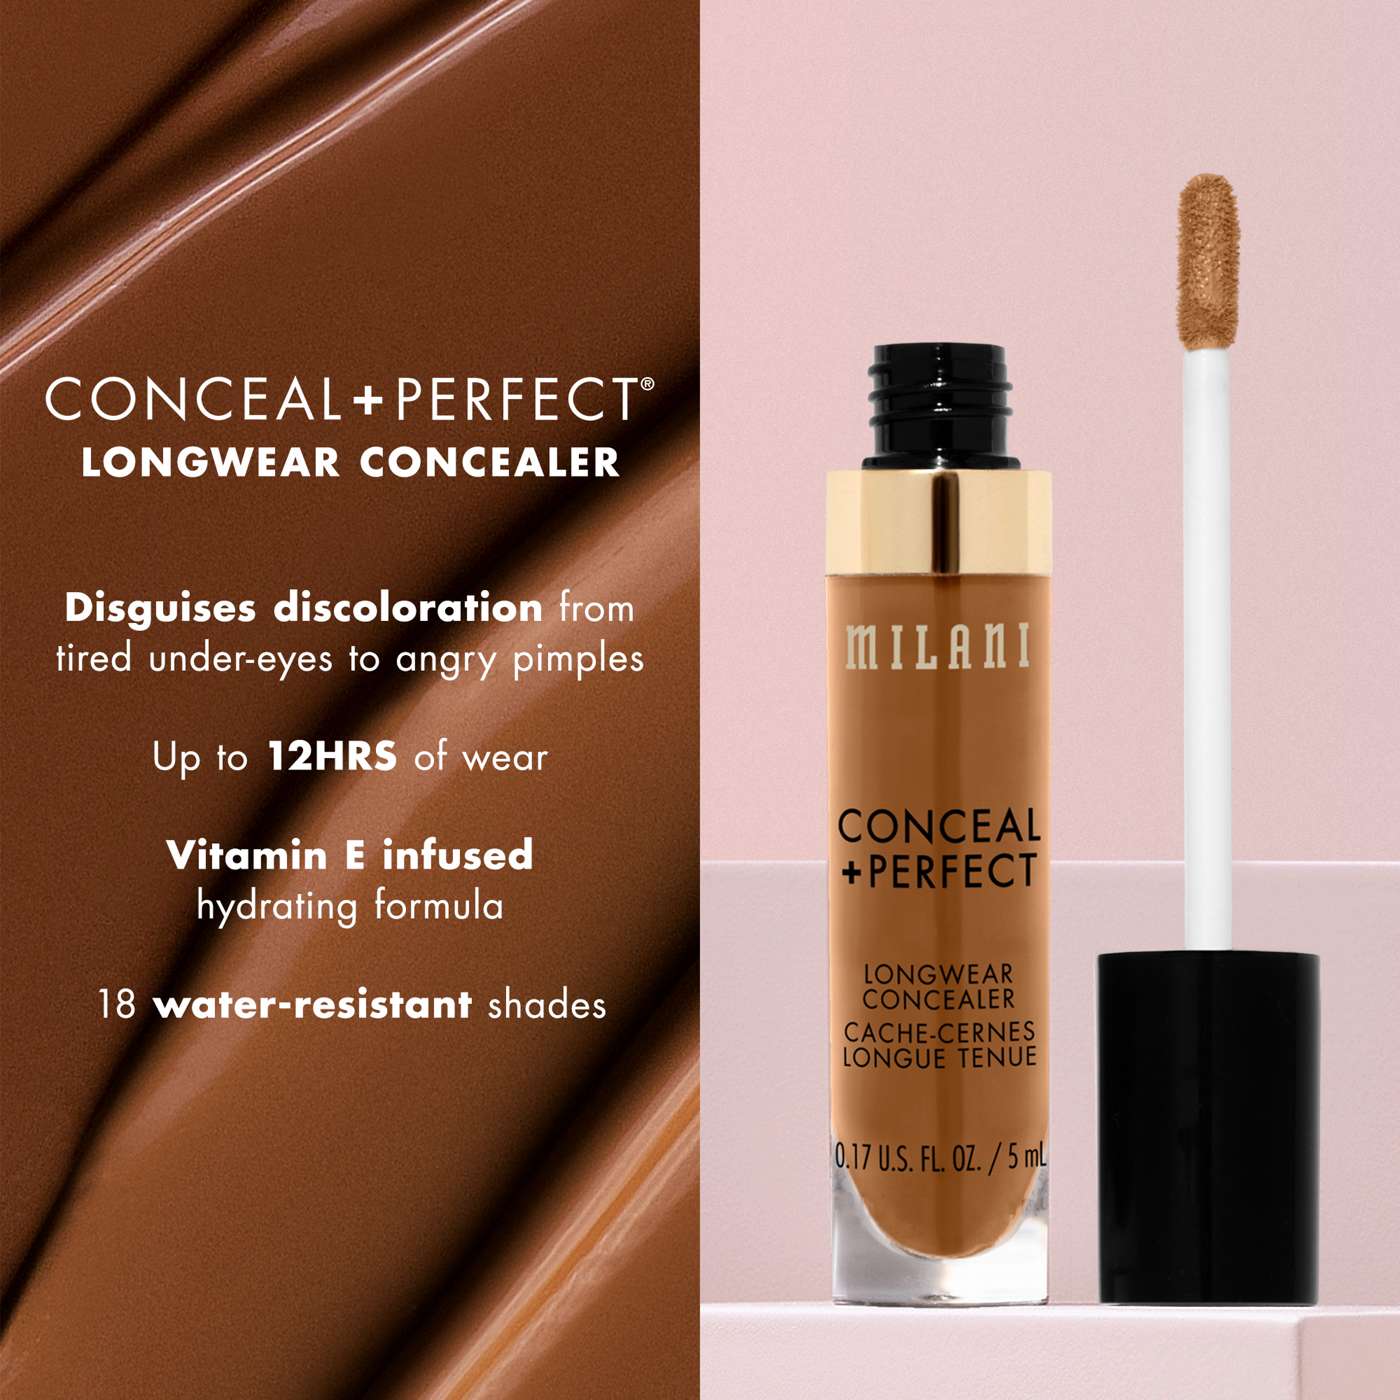 Milani Conceal +Perfect Longwear Concealer - Cool Sand; image 9 of 9